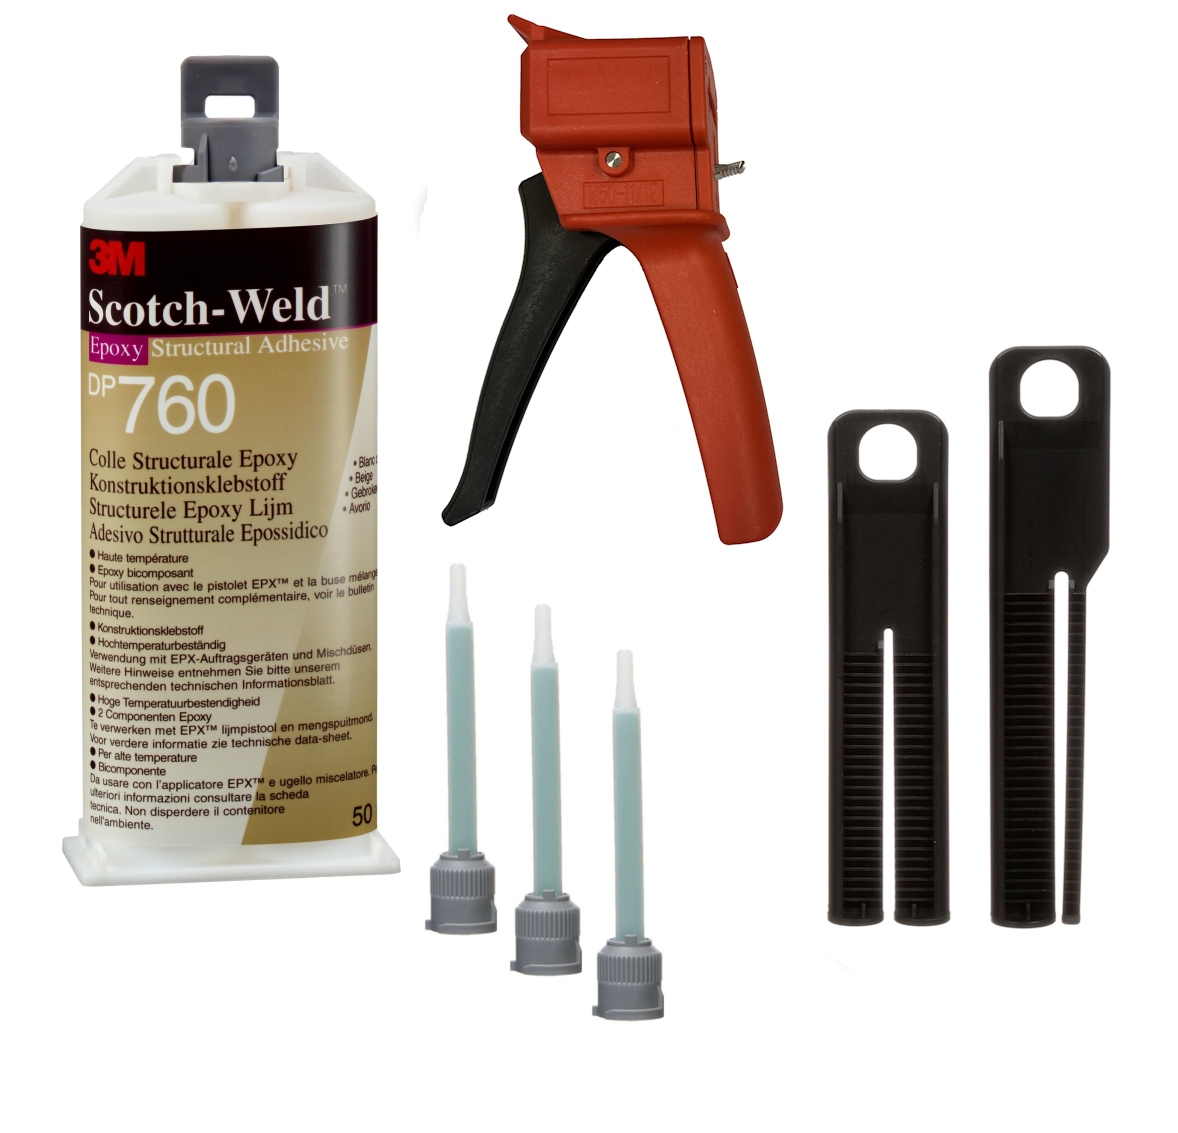 Starter set: 1x 3M Scotch-Weld 2-component construction adhesive EPX System DP760, white, 50 ml, 1x S-K-S hand tool for EPX 38 to 50 ml cartridges incl. feed piston 2:1